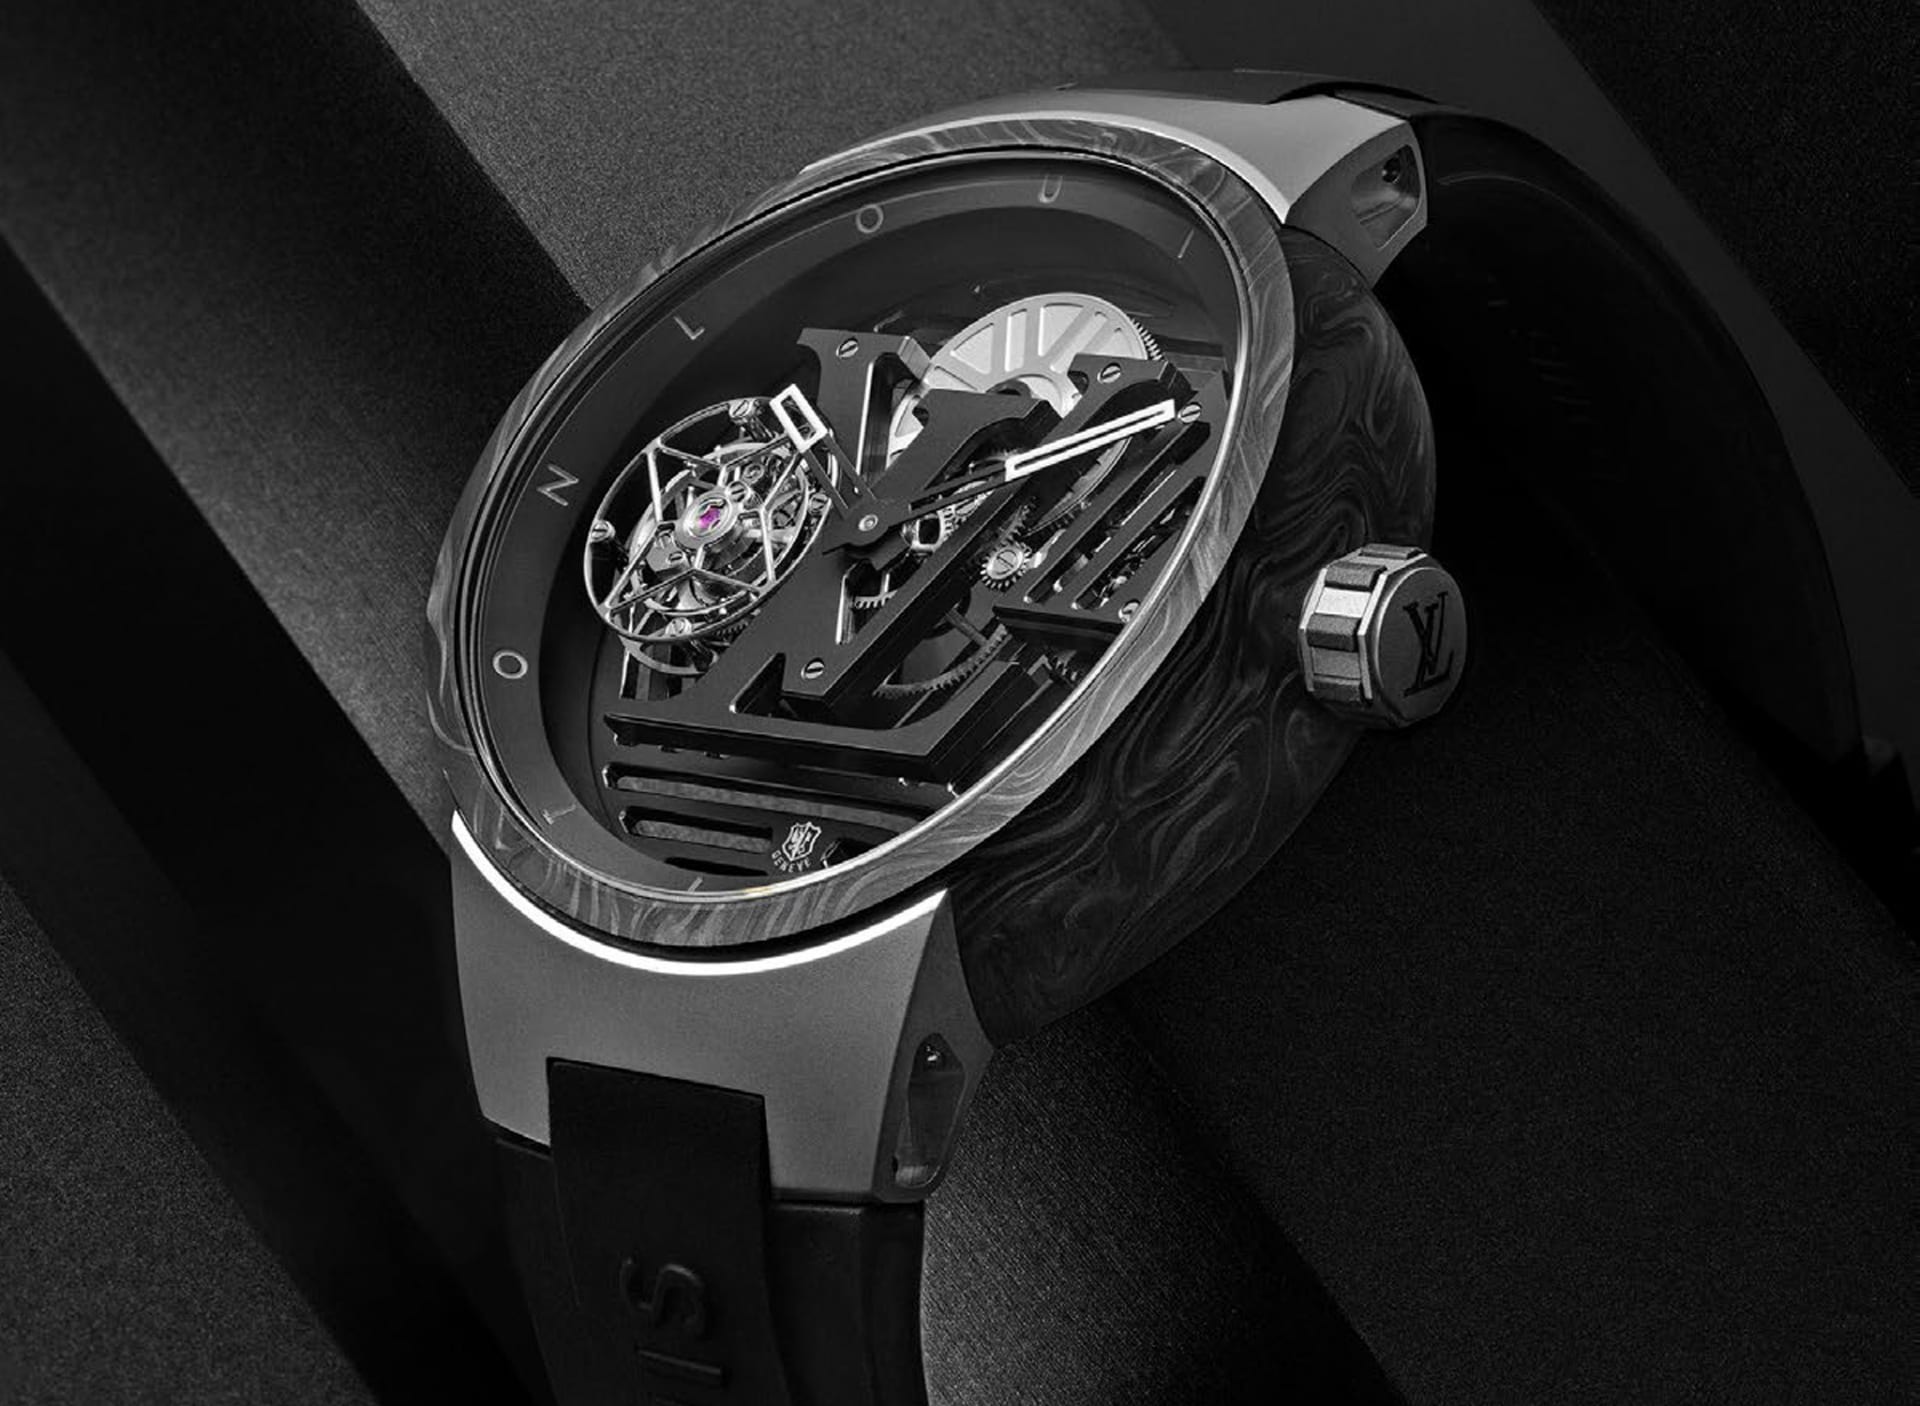 Louis Vuitton Goes High-Tech For New Tambour Curve Flying Tourbillon